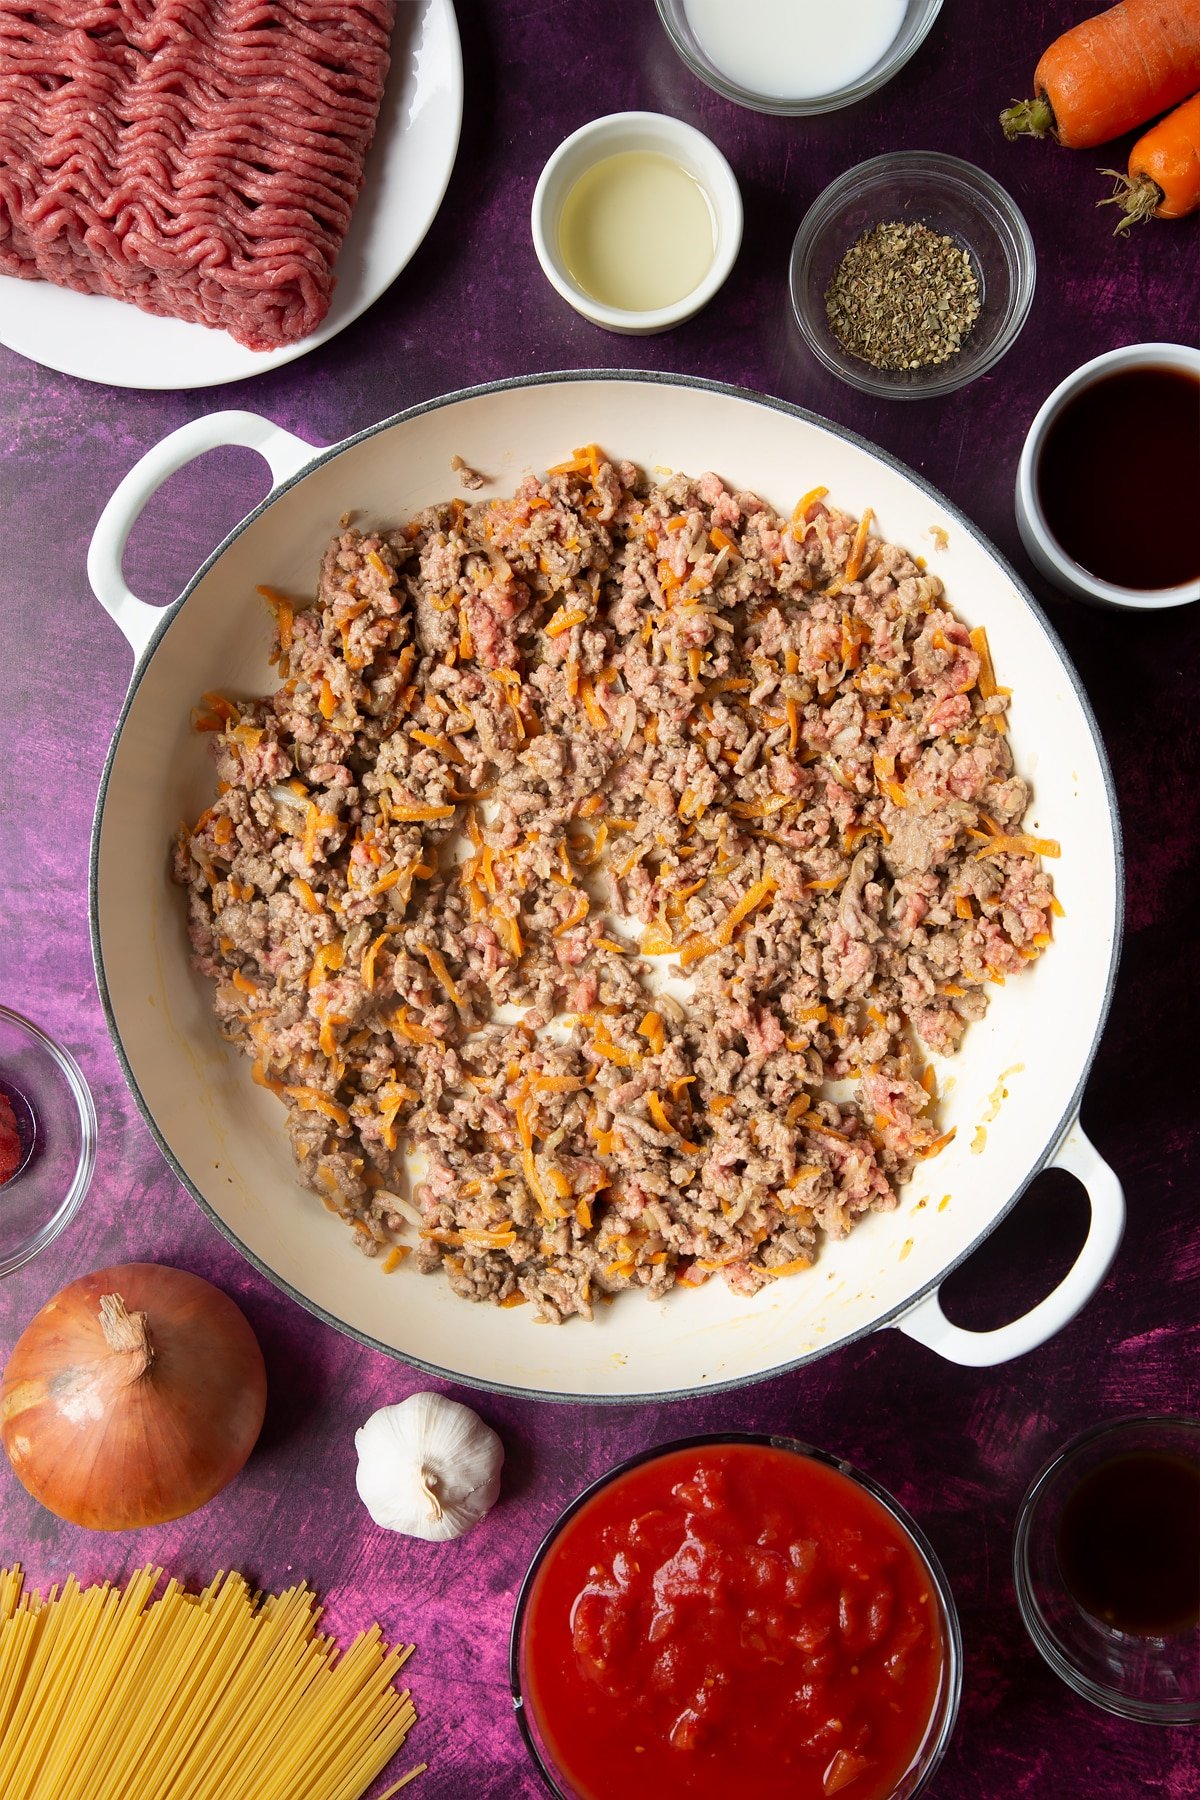 A large frying pan with fried carrot, onion, garlic, dried oregano and lean beef mince. Ingredients to make spaghetti bolognese Gordon Ramsay style surround the pan.